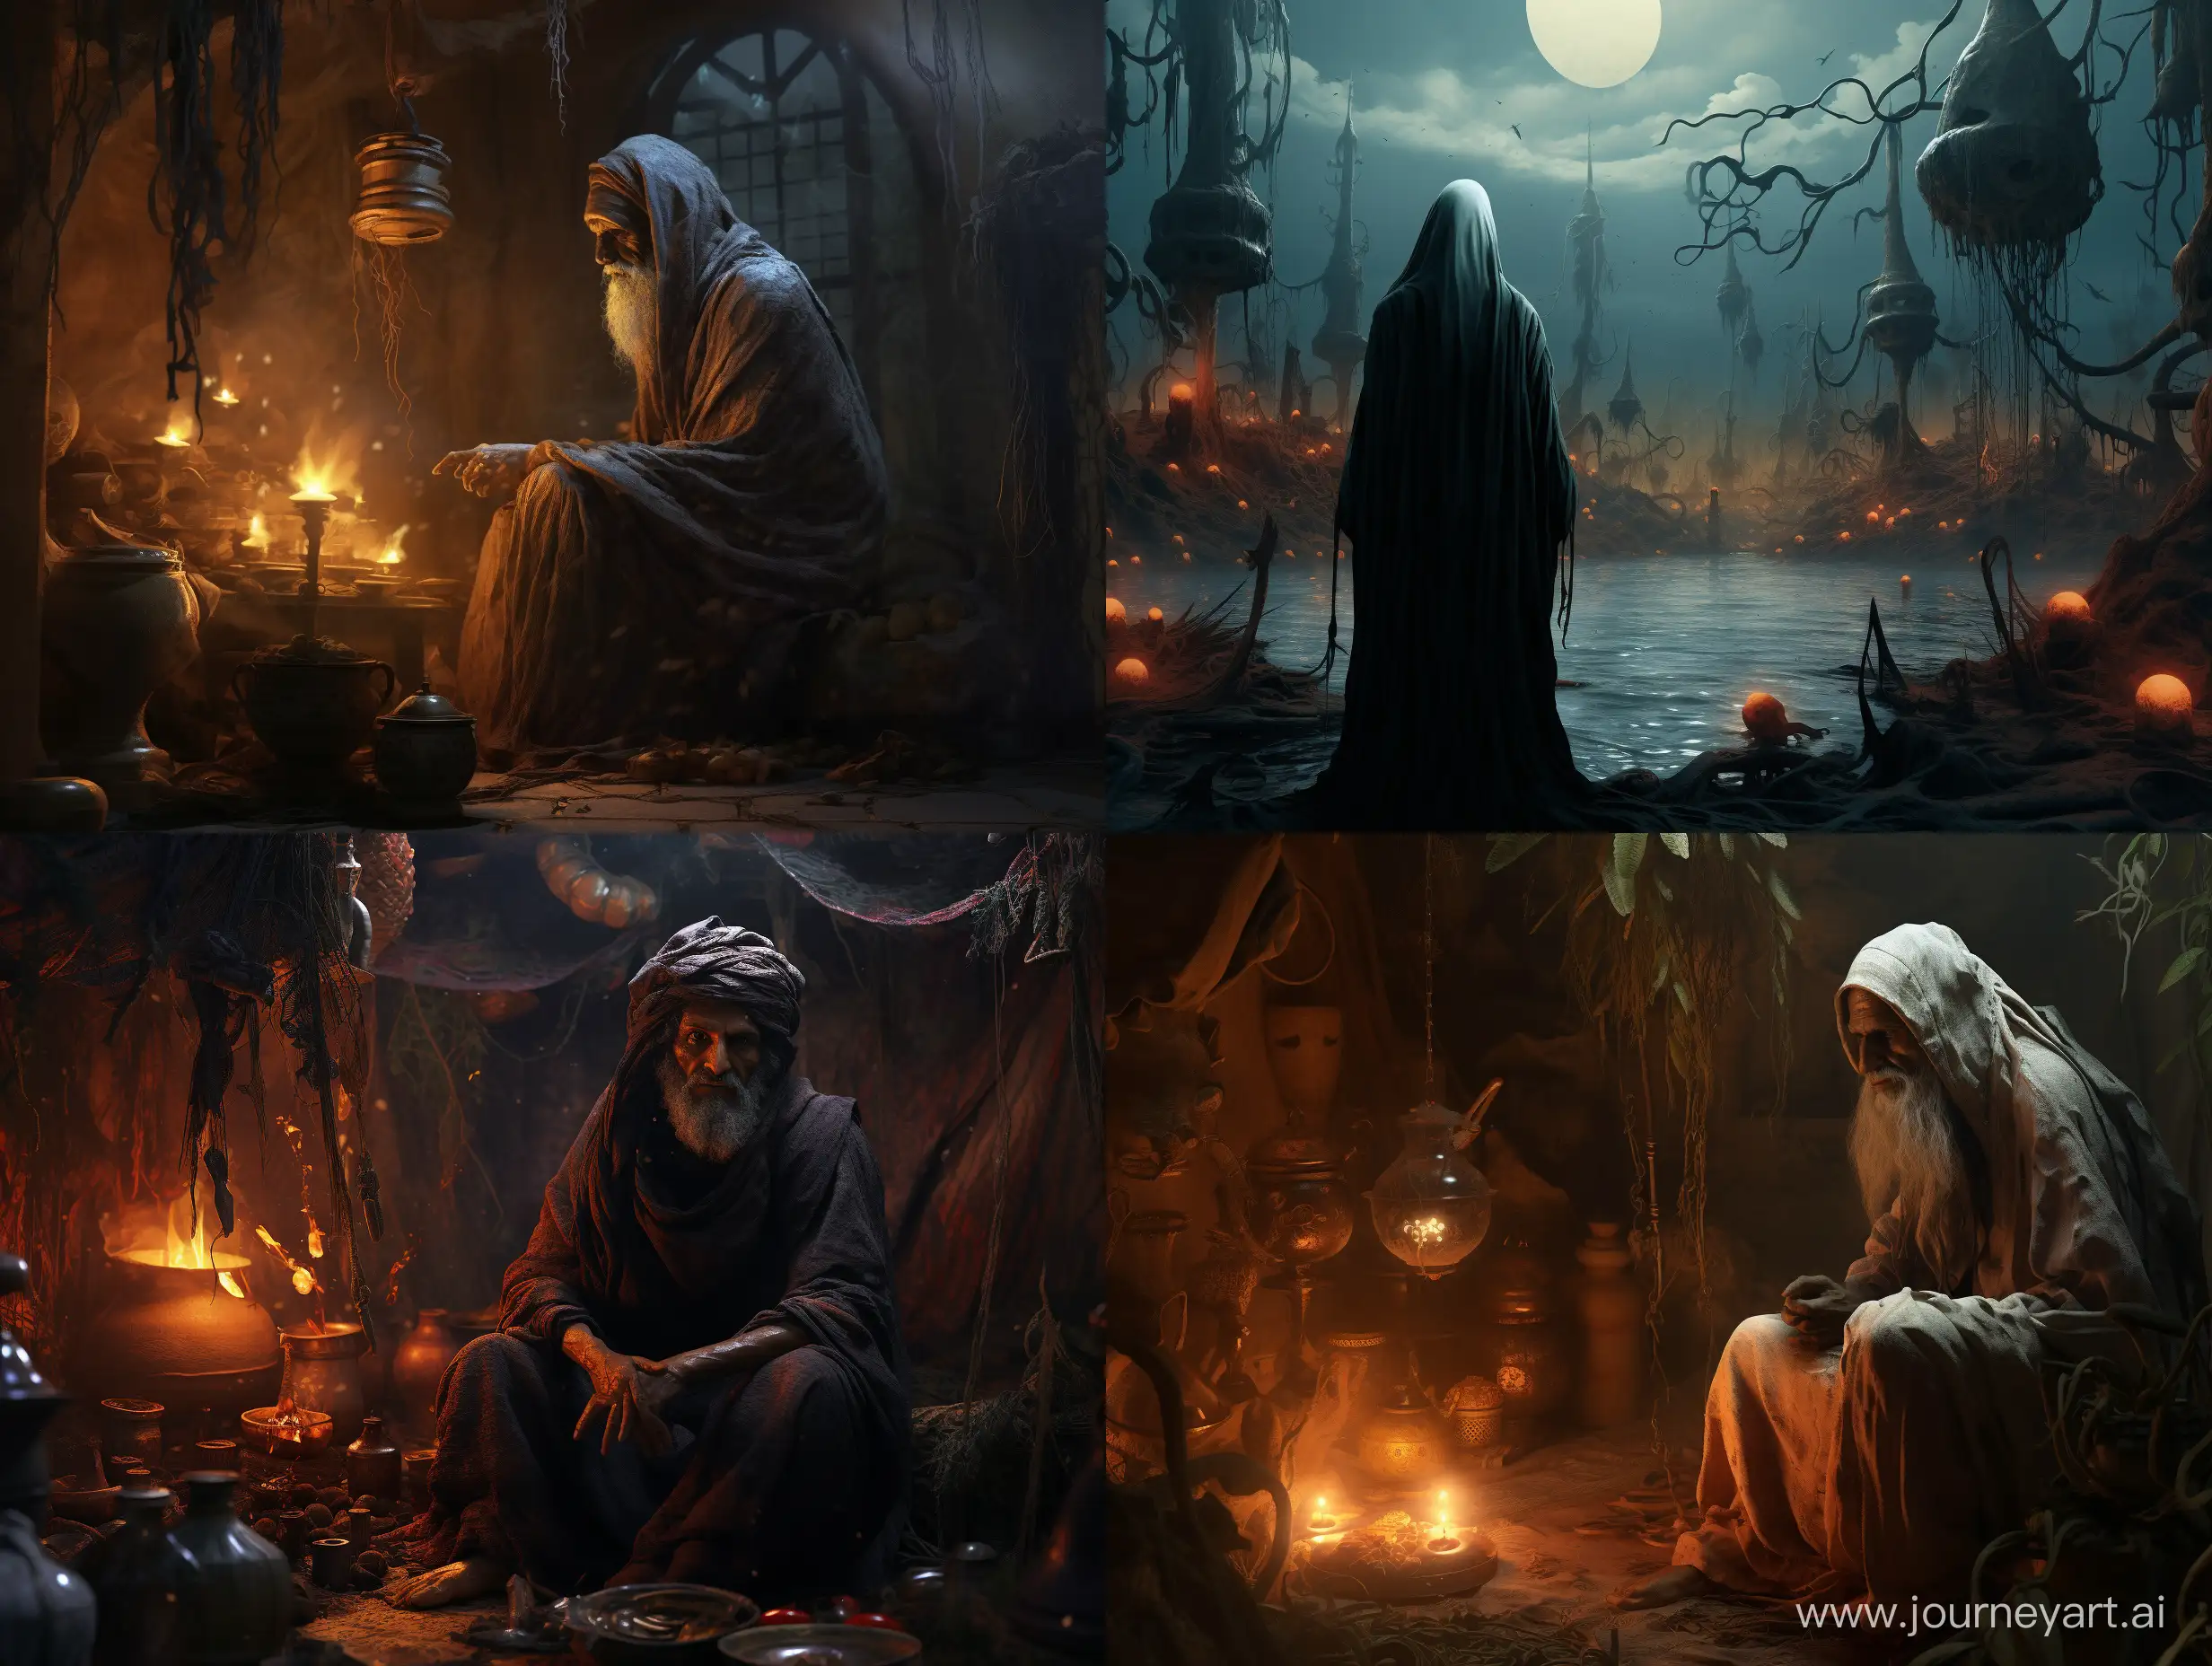 Enchanting-Arabian-Fairytale-with-Ugly-Witch-Man